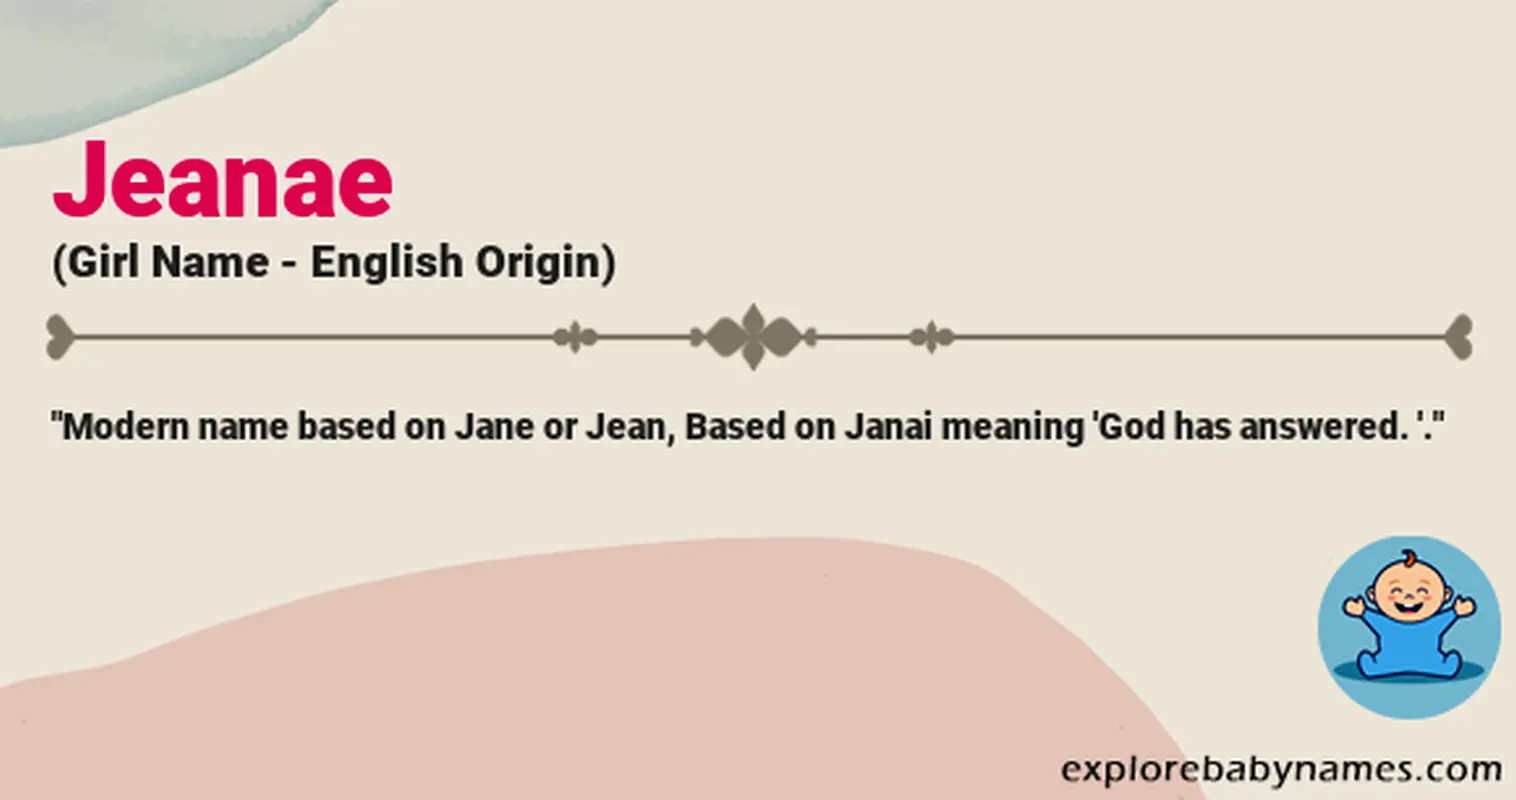 Meaning of Jeanae